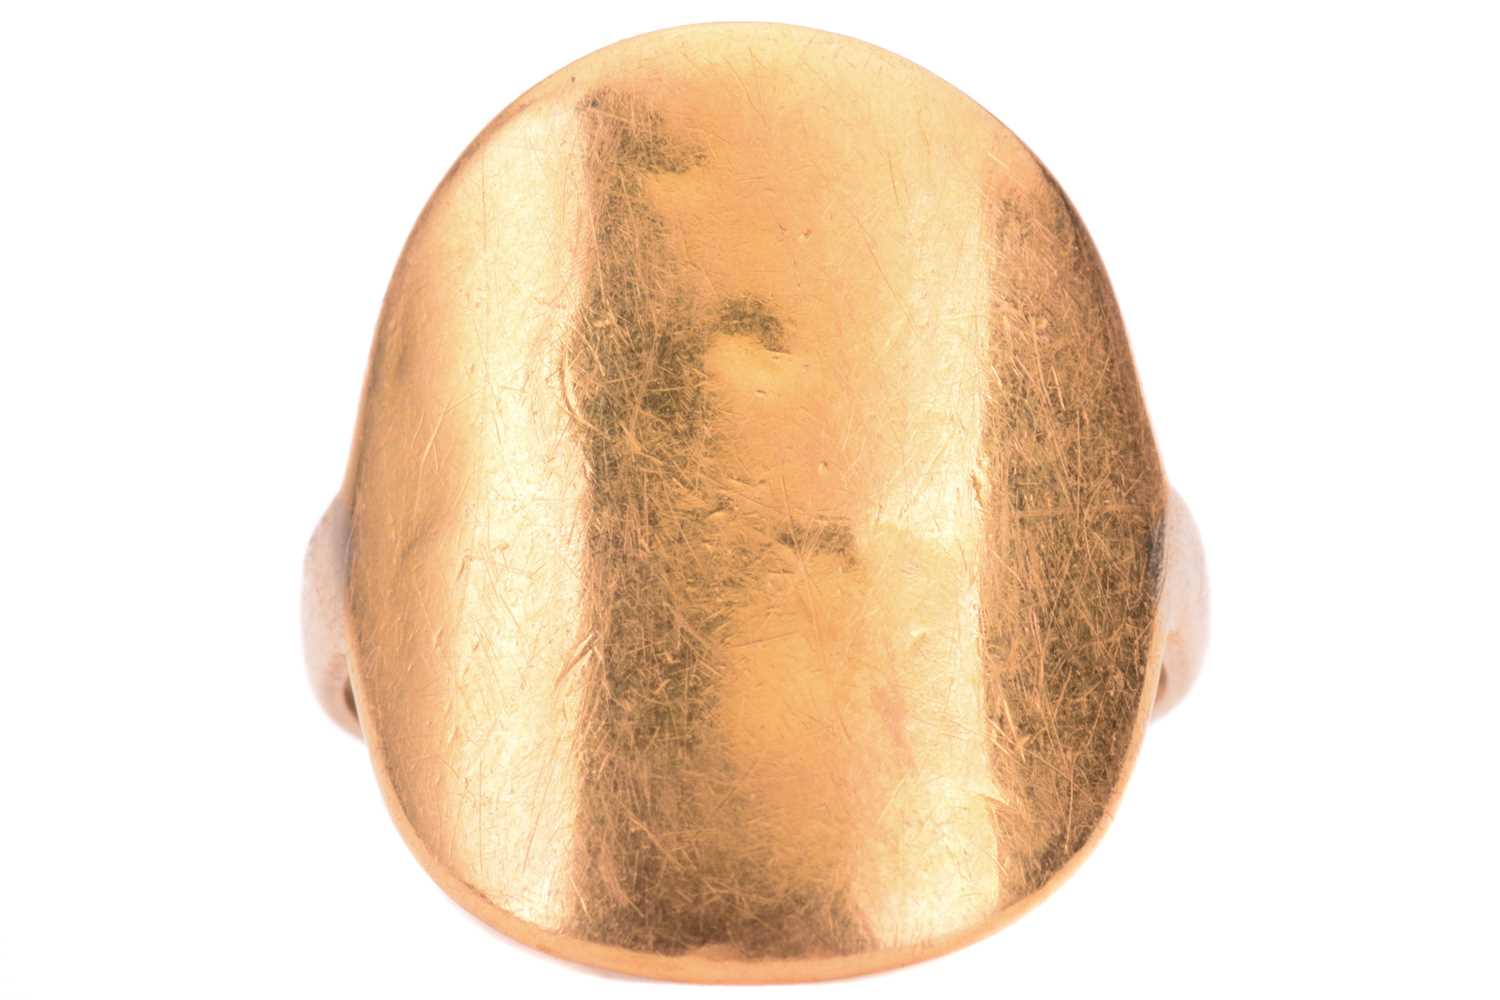 A George V half-sovereign bent-over ring, the surface has been polished off, with the bare head of